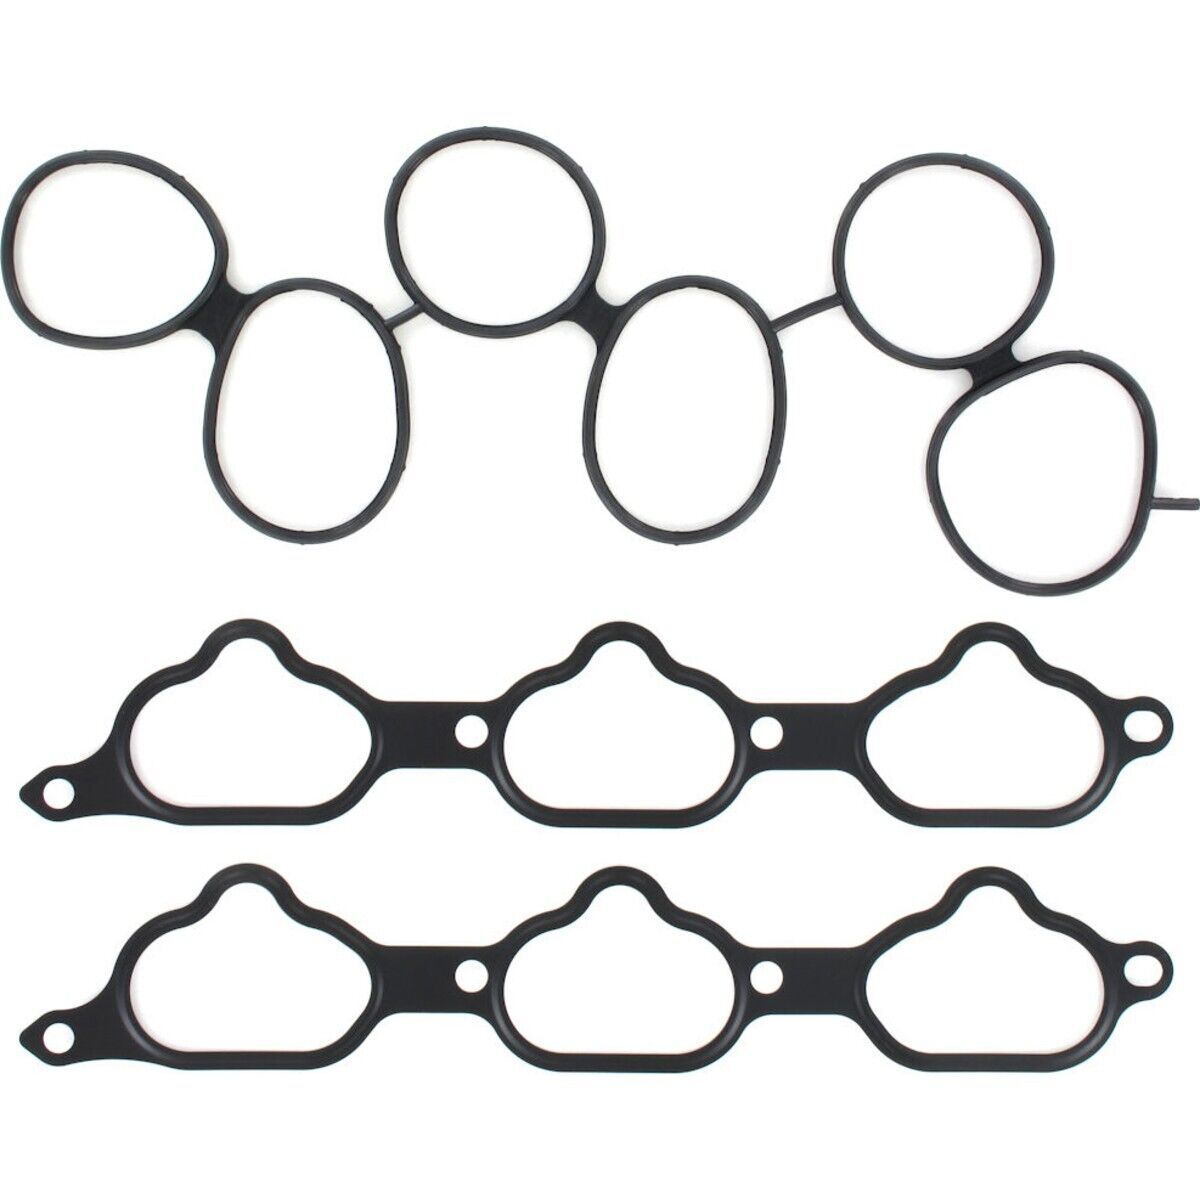 AMS8780 APEX Intake Manifold Gaskets Set for Lexus IS350 GS350 GS450h RC350